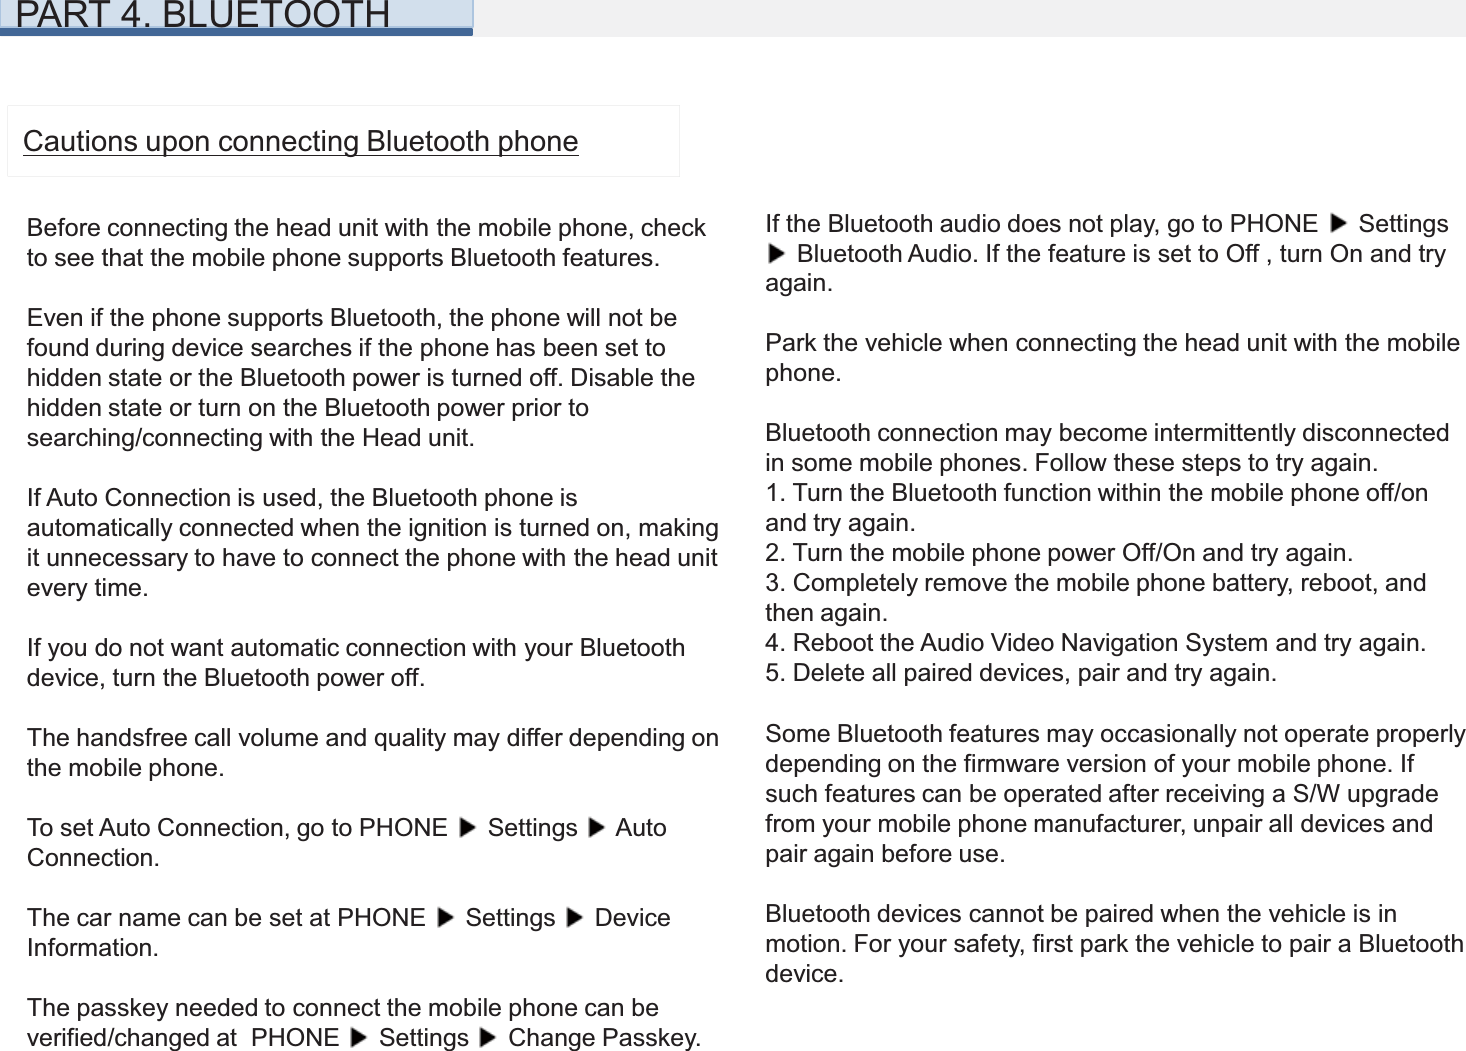 PART 4. BLUETOOTHCautions upon connecting Bluetooth phoneBefore connecting the head unit with the mobile phone, checkto see that the mobile phone supports Bluetooth features.Even if the phone supports Bluetooth, the phone will not befound during device searches if the phone has been set tohidden state or the Bluetooth power is turned off. Disable thehidden state or turn on the Bluetooth power prior to searching/connecting with the Head unit.If Auto Connection is used, the Bluetooth phone is automatically connected when the ignition is turned on, making it unnecessary to have to connect the phone with the head unit every time.If you do not want automatic connection with your Bluetooth device, turn the Bluetooth power off.The handsfree call volume and quality may differ depending onthe mobile phone.To set Auto Connection, go to PHONE  Settings  Auto Connection.The car name can be set at PHONE  Settings  Device Information.The passkey needed to connect the mobile phone can be verified/changed at  PHONE  Settings  Change Passkey.If the Bluetooth audio does not play, go to PHONE  Settings Bluetooth Audio. If the feature is set to Off , turn On and try again.Park the vehicle when connecting the head unit with the mobile phone.Bluetooth connection may become intermittently disconnected in some mobile phones. Follow these steps to try again.1. Turn the Bluetooth function within the mobile phone off/on and try again.2. Turn the mobile phone power Off/On and try again.3. Completely remove the mobile phone battery, reboot, and then again.4. Reboot the Audio Video Navigation System and try again.5. Delete all paired devices, pair and try again.Some Bluetooth features may occasionally not operate properly depending on the firmware version of your mobile phone. If such features can be operated after receiving a S/W upgrade from your mobile phone manufacturer, unpair all devices and pair again before use.Bluetooth devices cannot be paired when the vehicle is in motion. For your safety, first park the vehicle to pair a Bluetooth device.